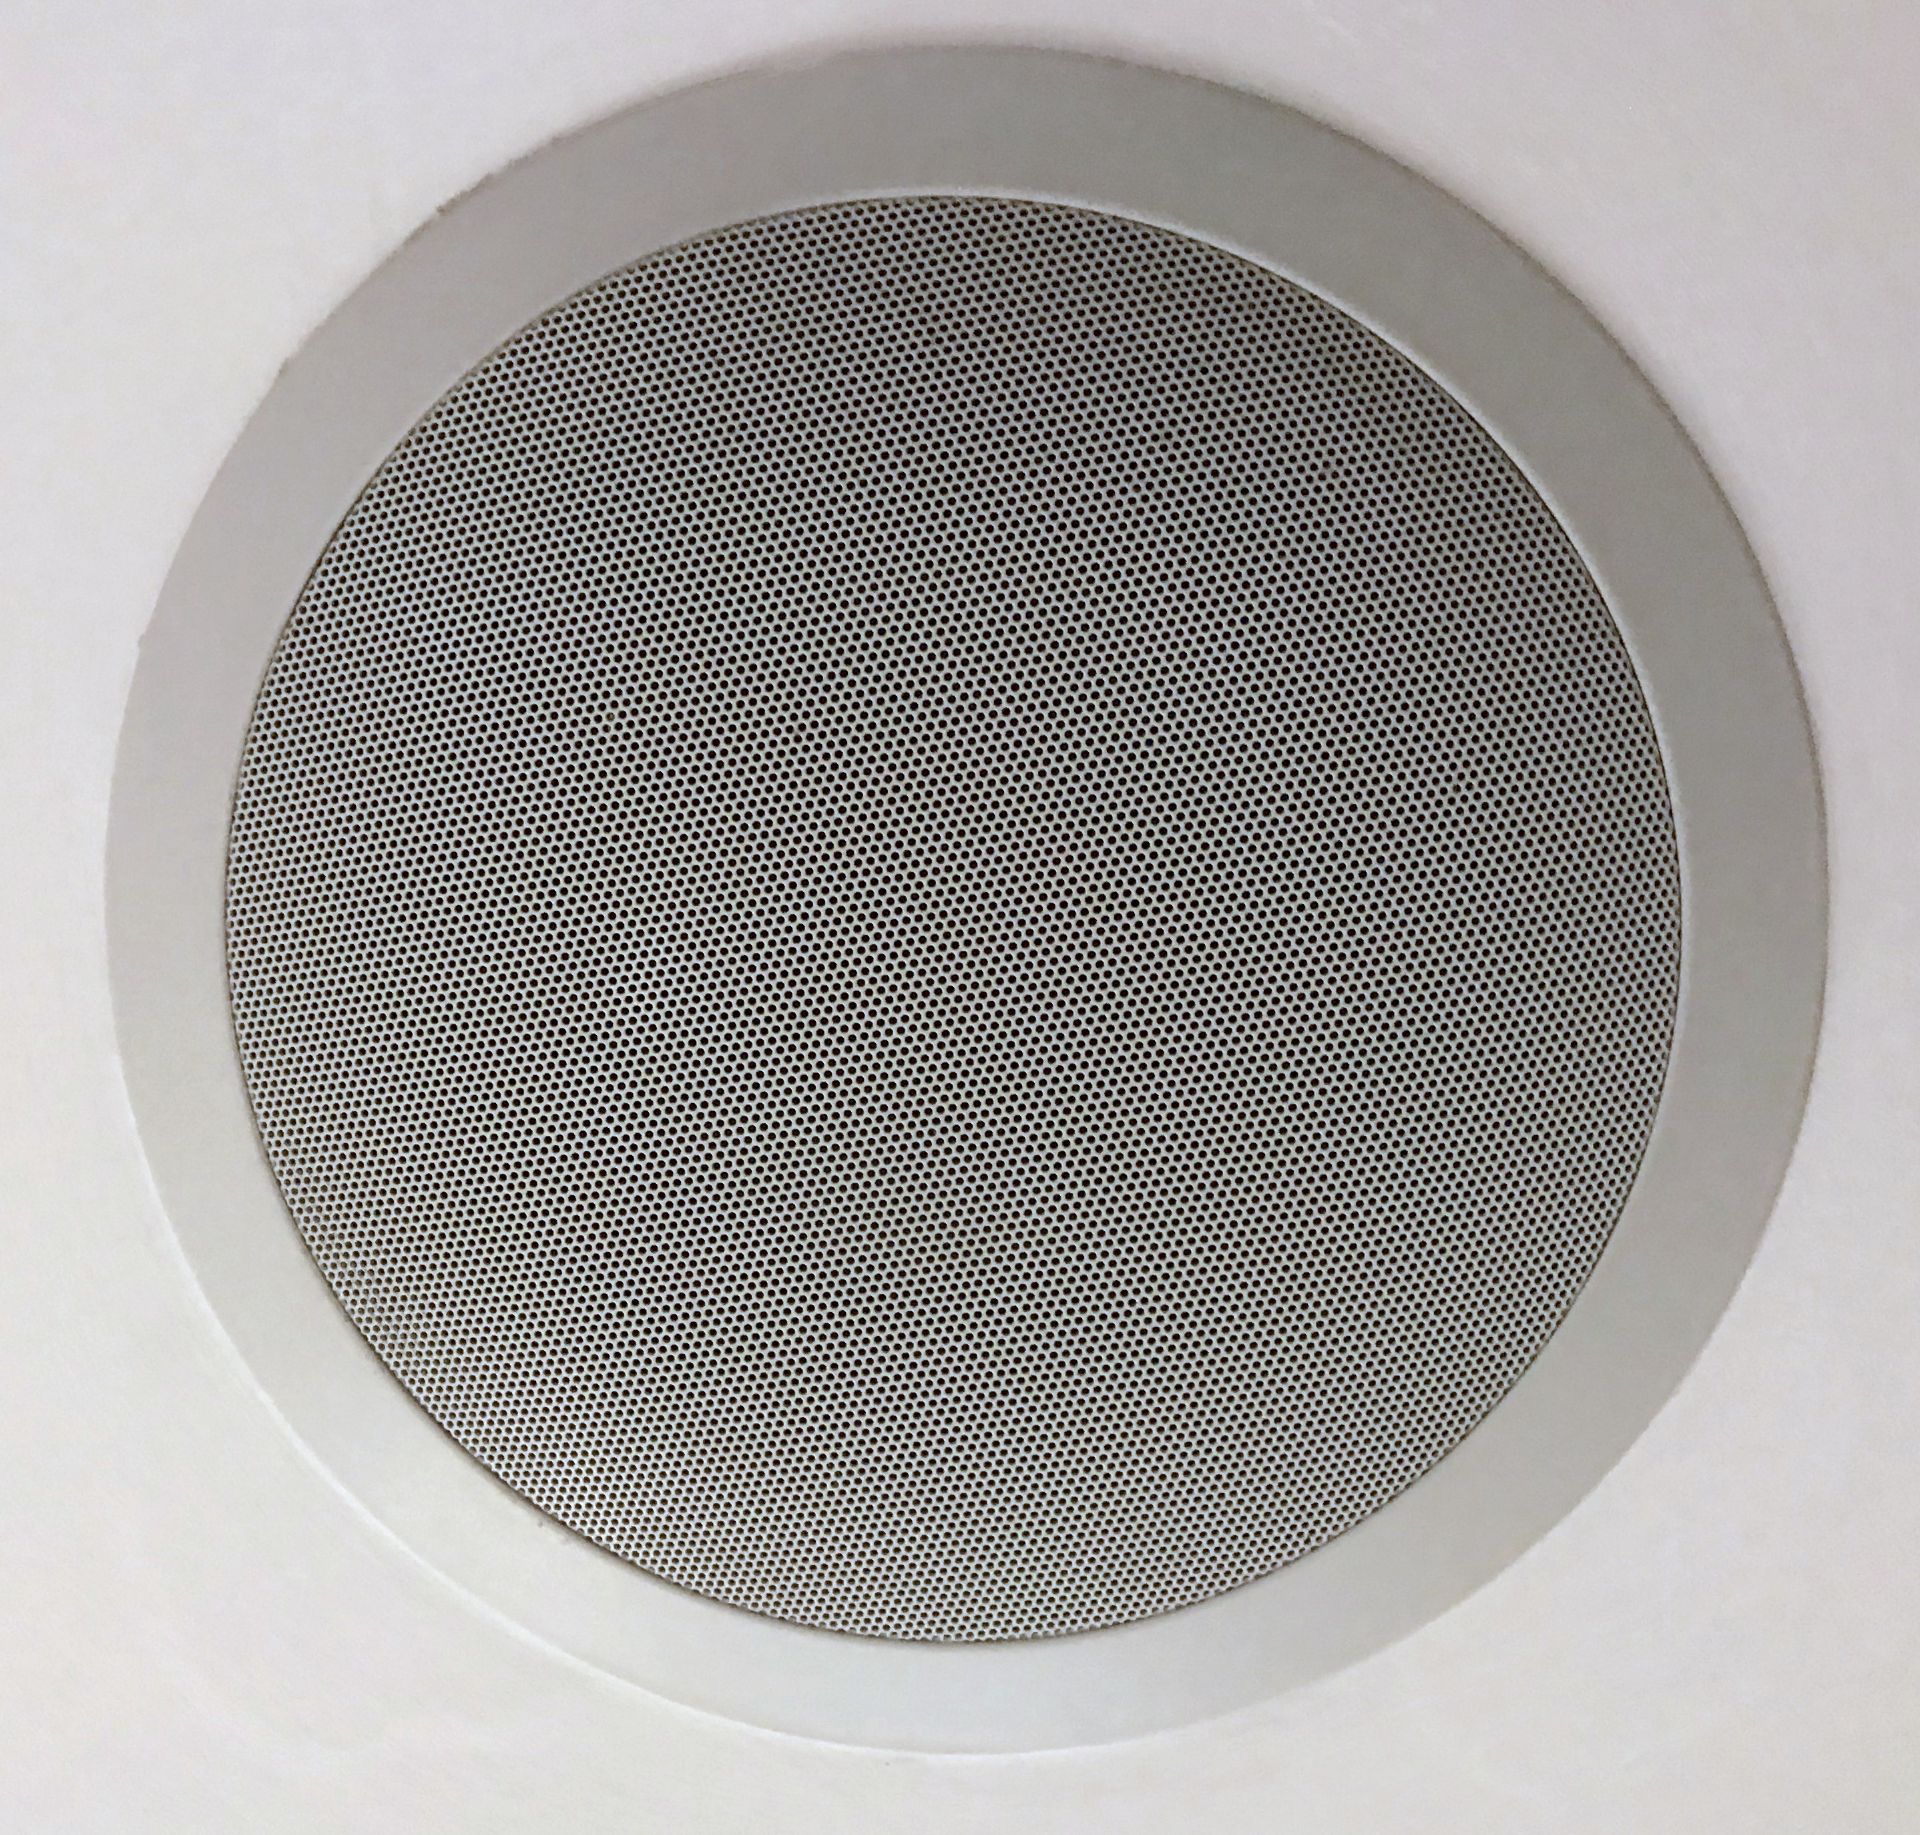 4 x Bang & Olufsen Flush Ceiling Mounted Speakers - CL587 - Location: London WC2H